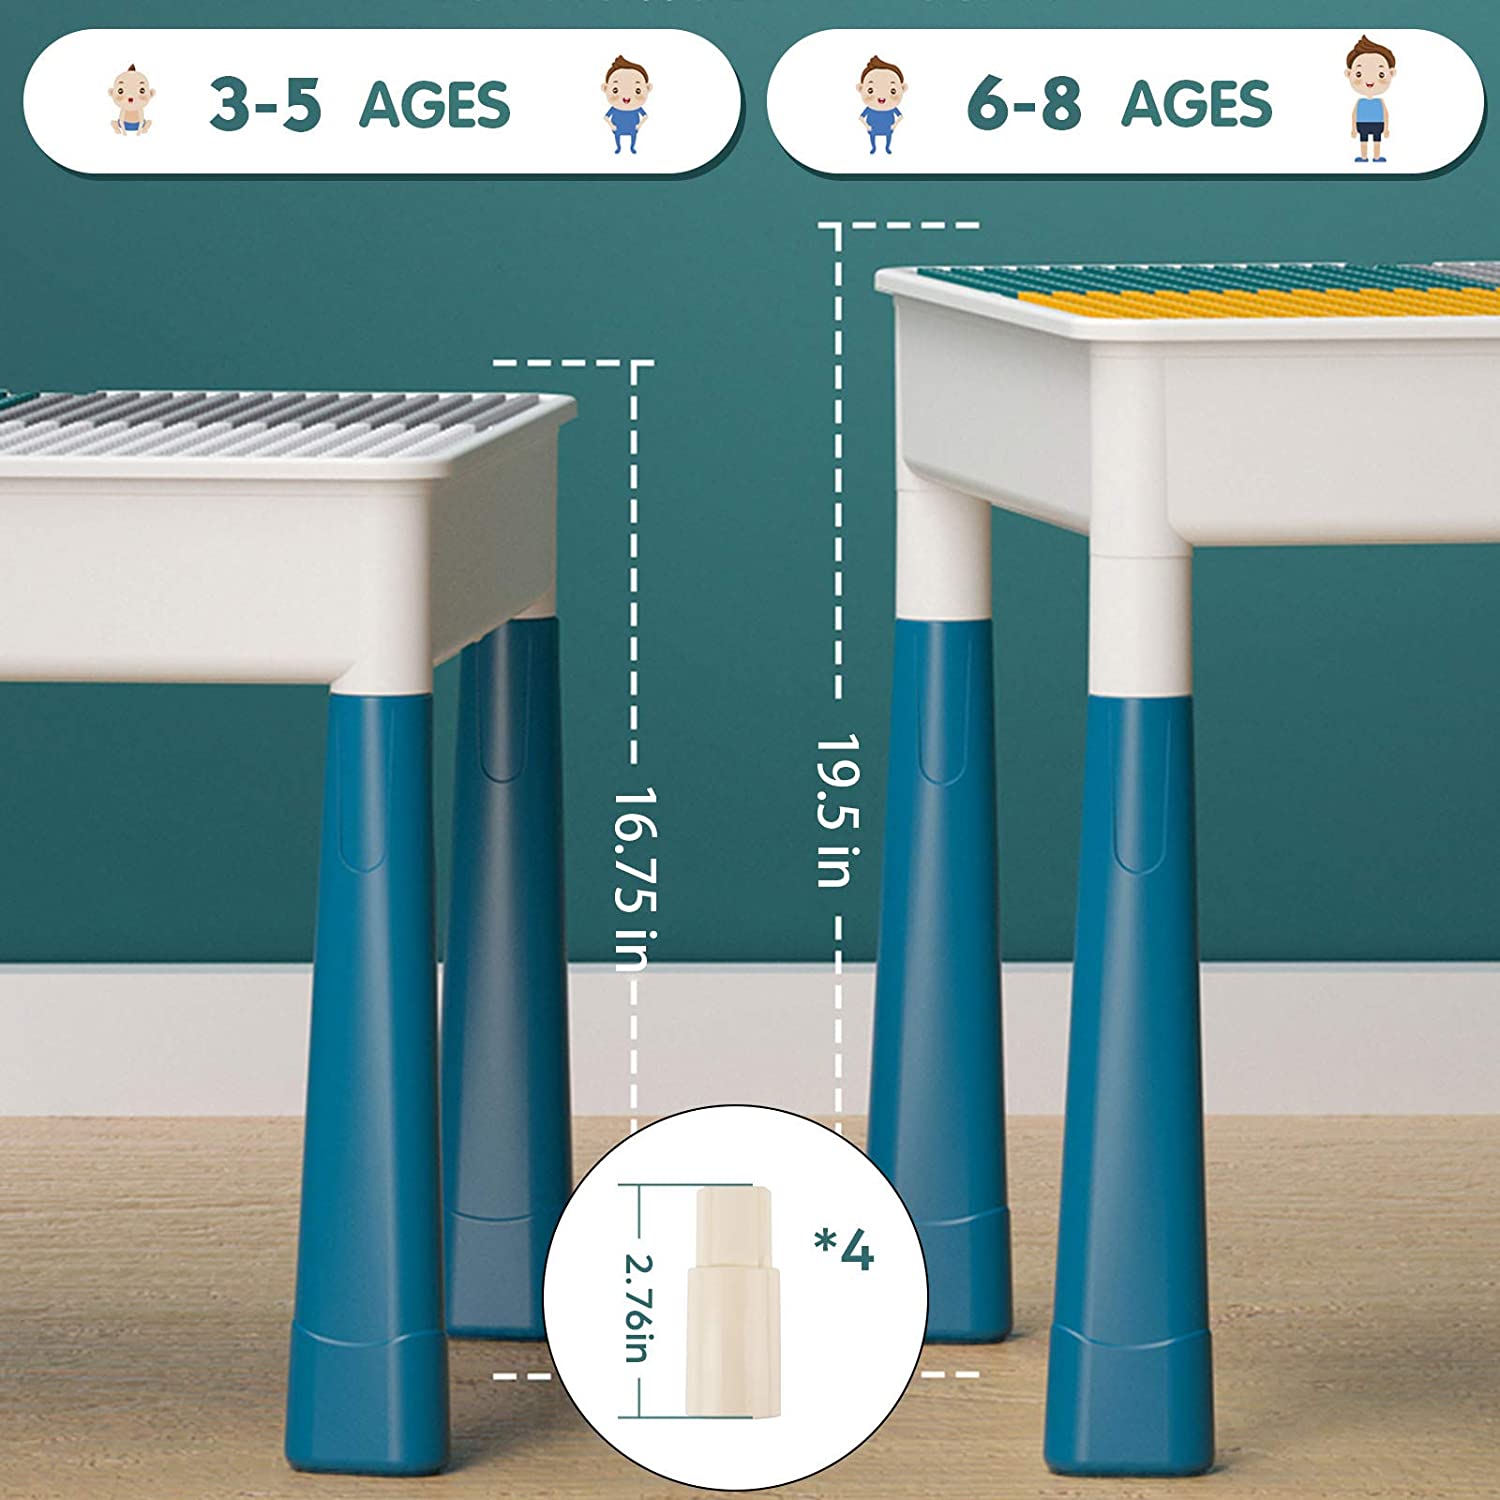 Household Blocks Table with Storage and Chair for Kids Ages 4-8 years - 12